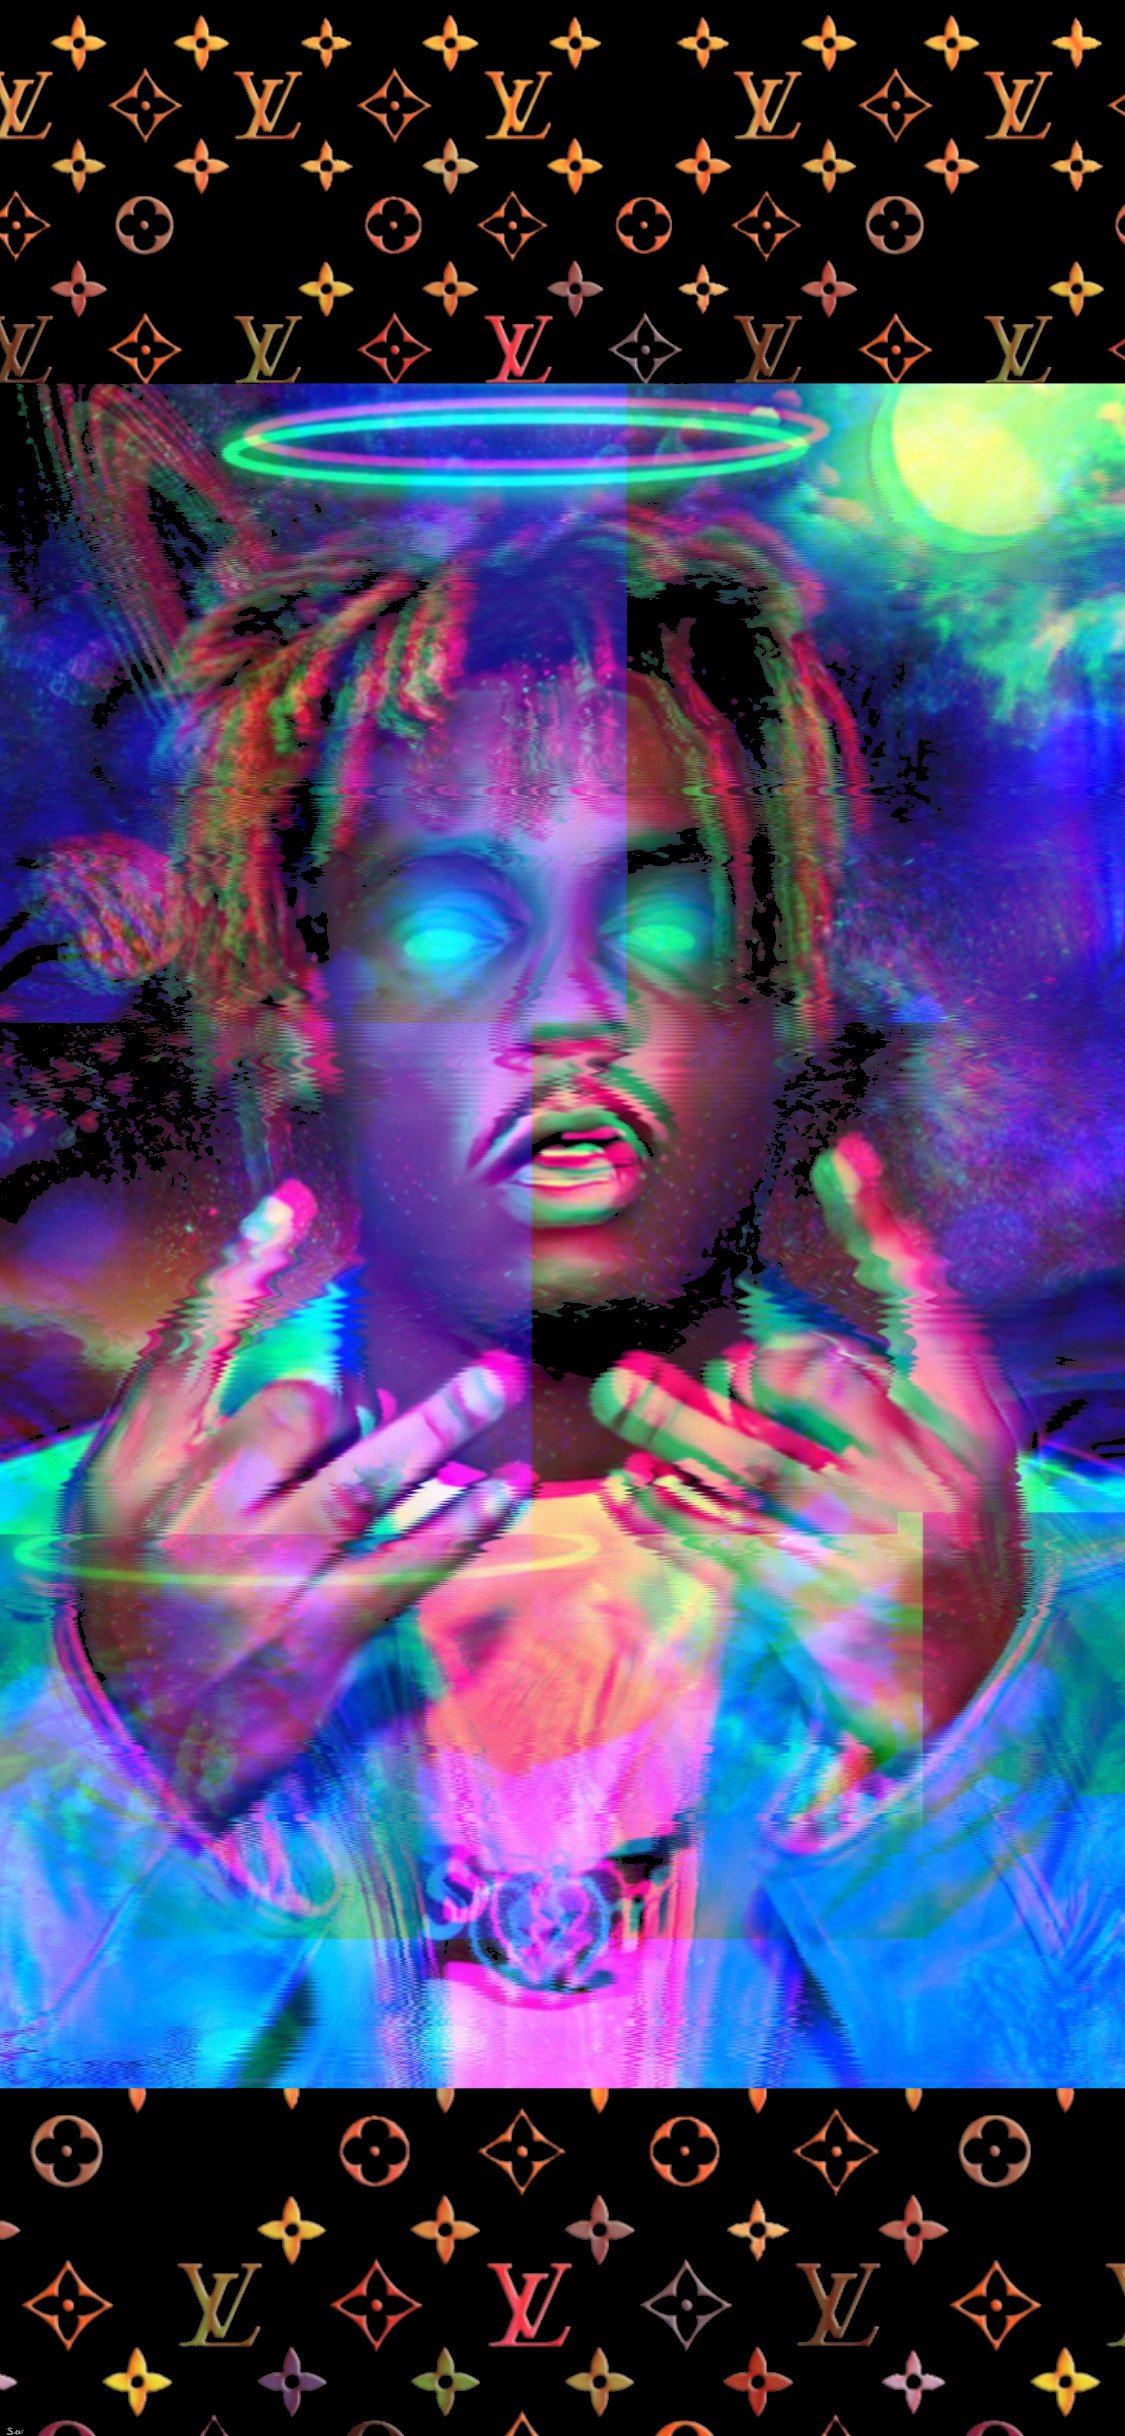 In honor of Juice WRLD I made this wallpaper for the iPhone EXR